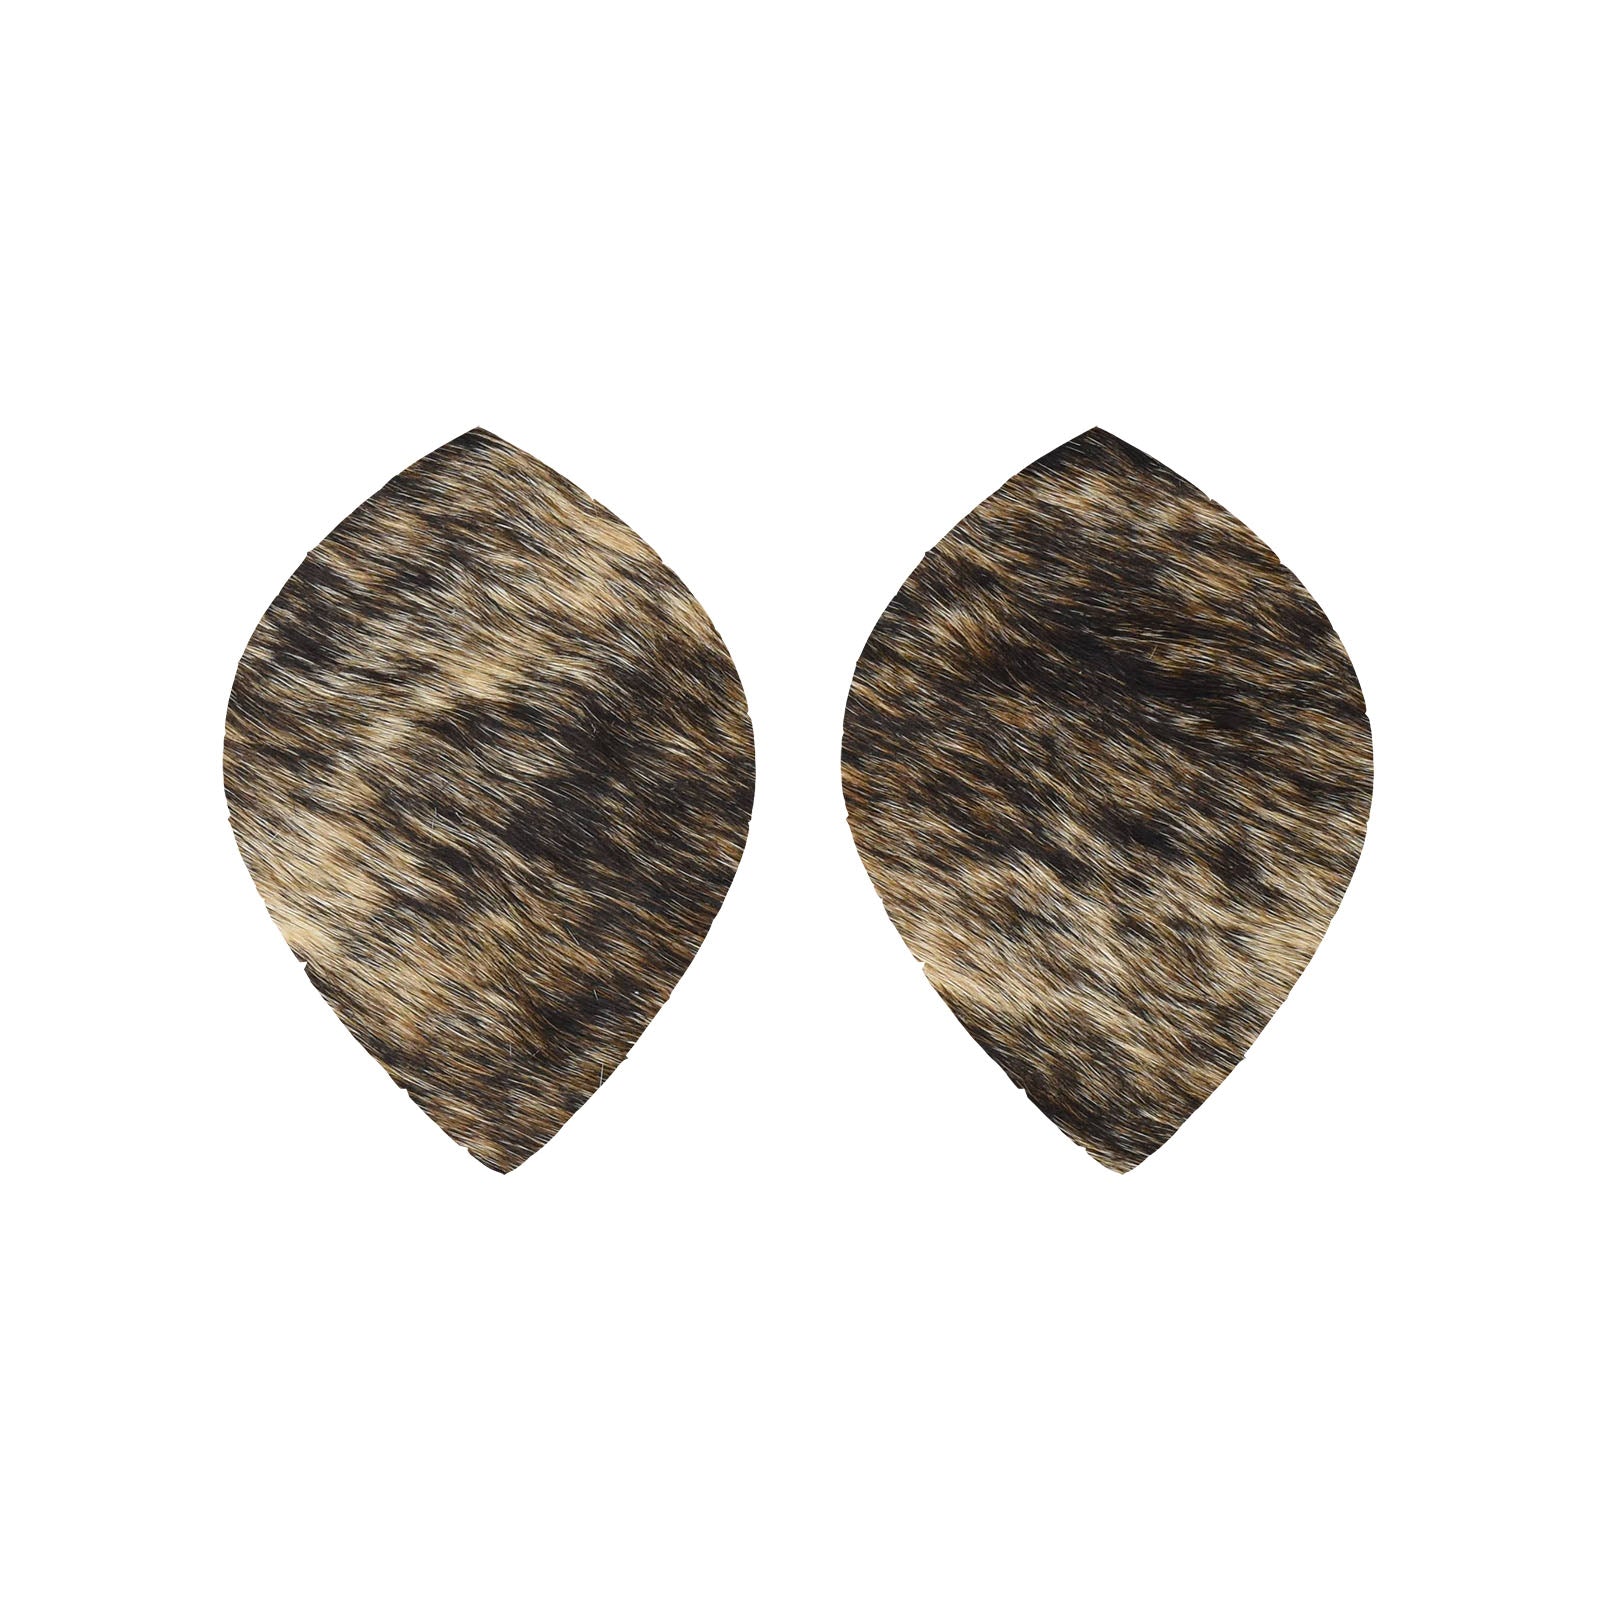 Light Brindle Light to Medium Brown, Black, and Off-White Hair On Die Cut Earrings, Large Leaf | The Leather Guy